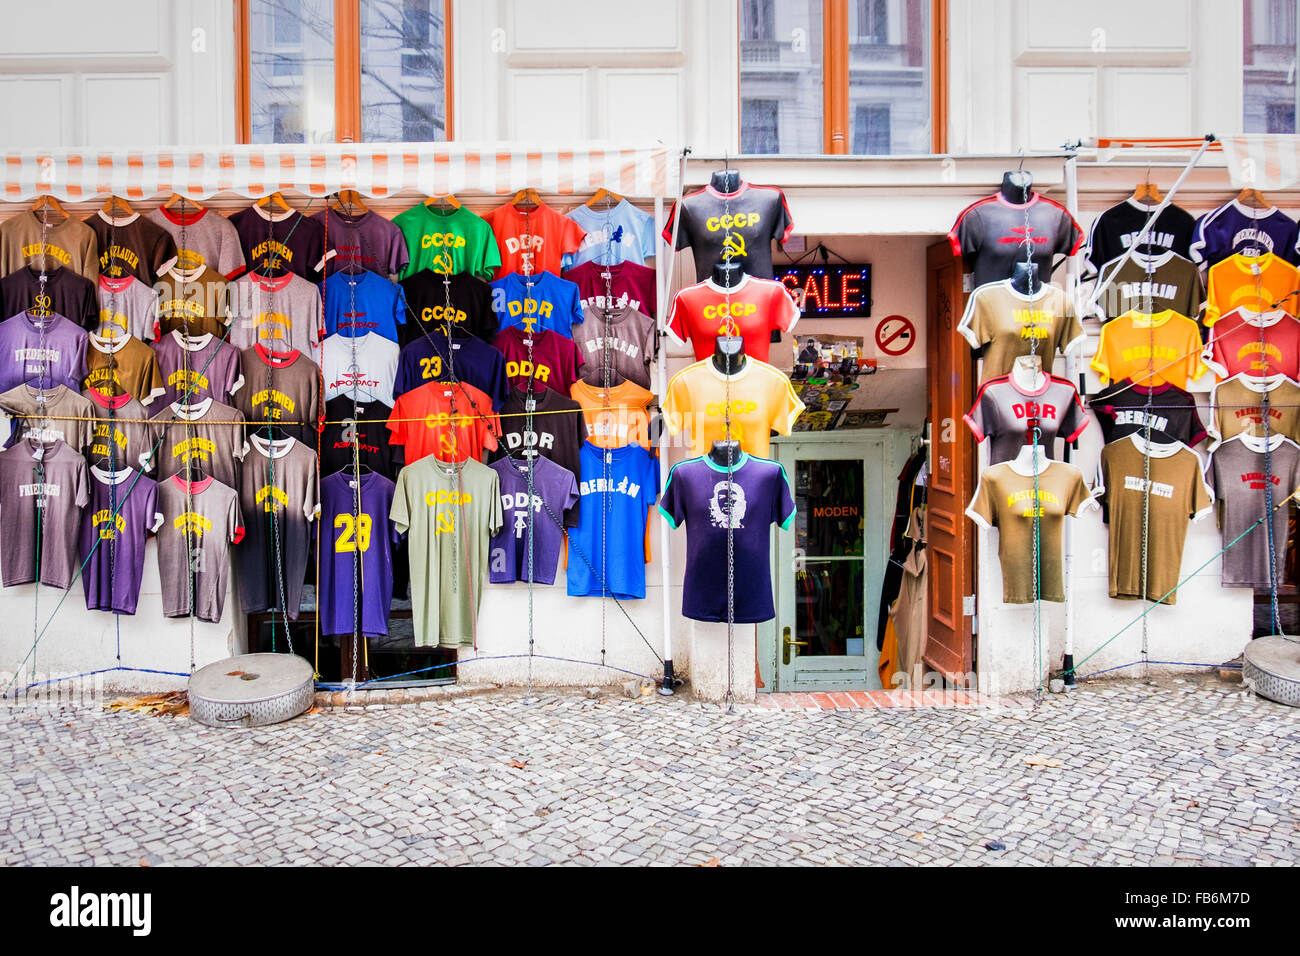 Berlin T-shirt shop. Display of colorful clothing outside store Stock Photo  - Alamy